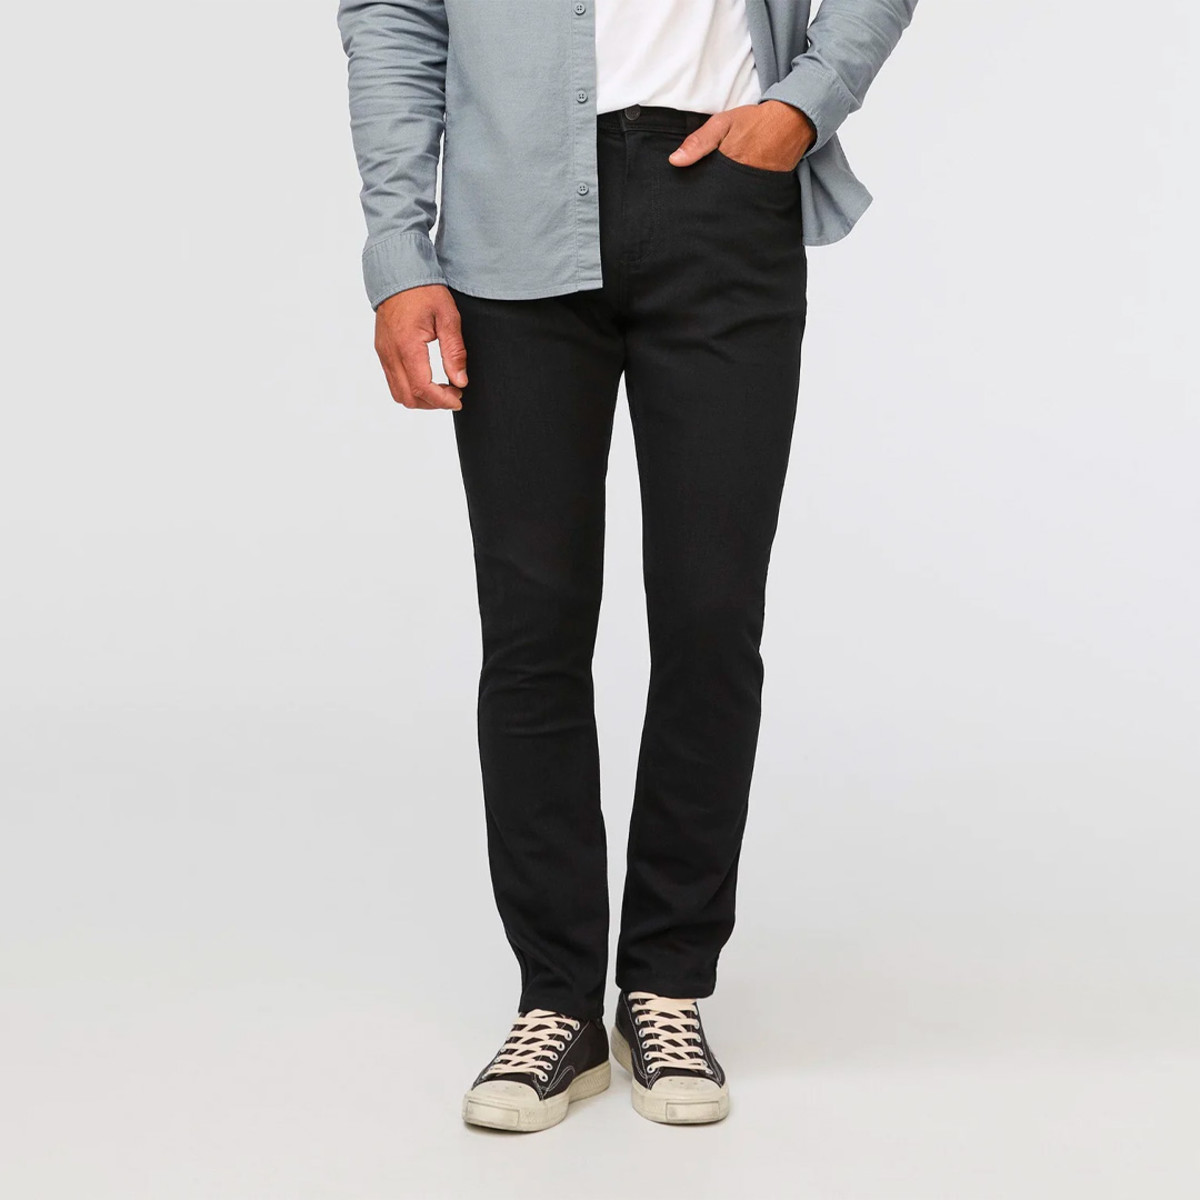 duer relaxed taper jeans gift